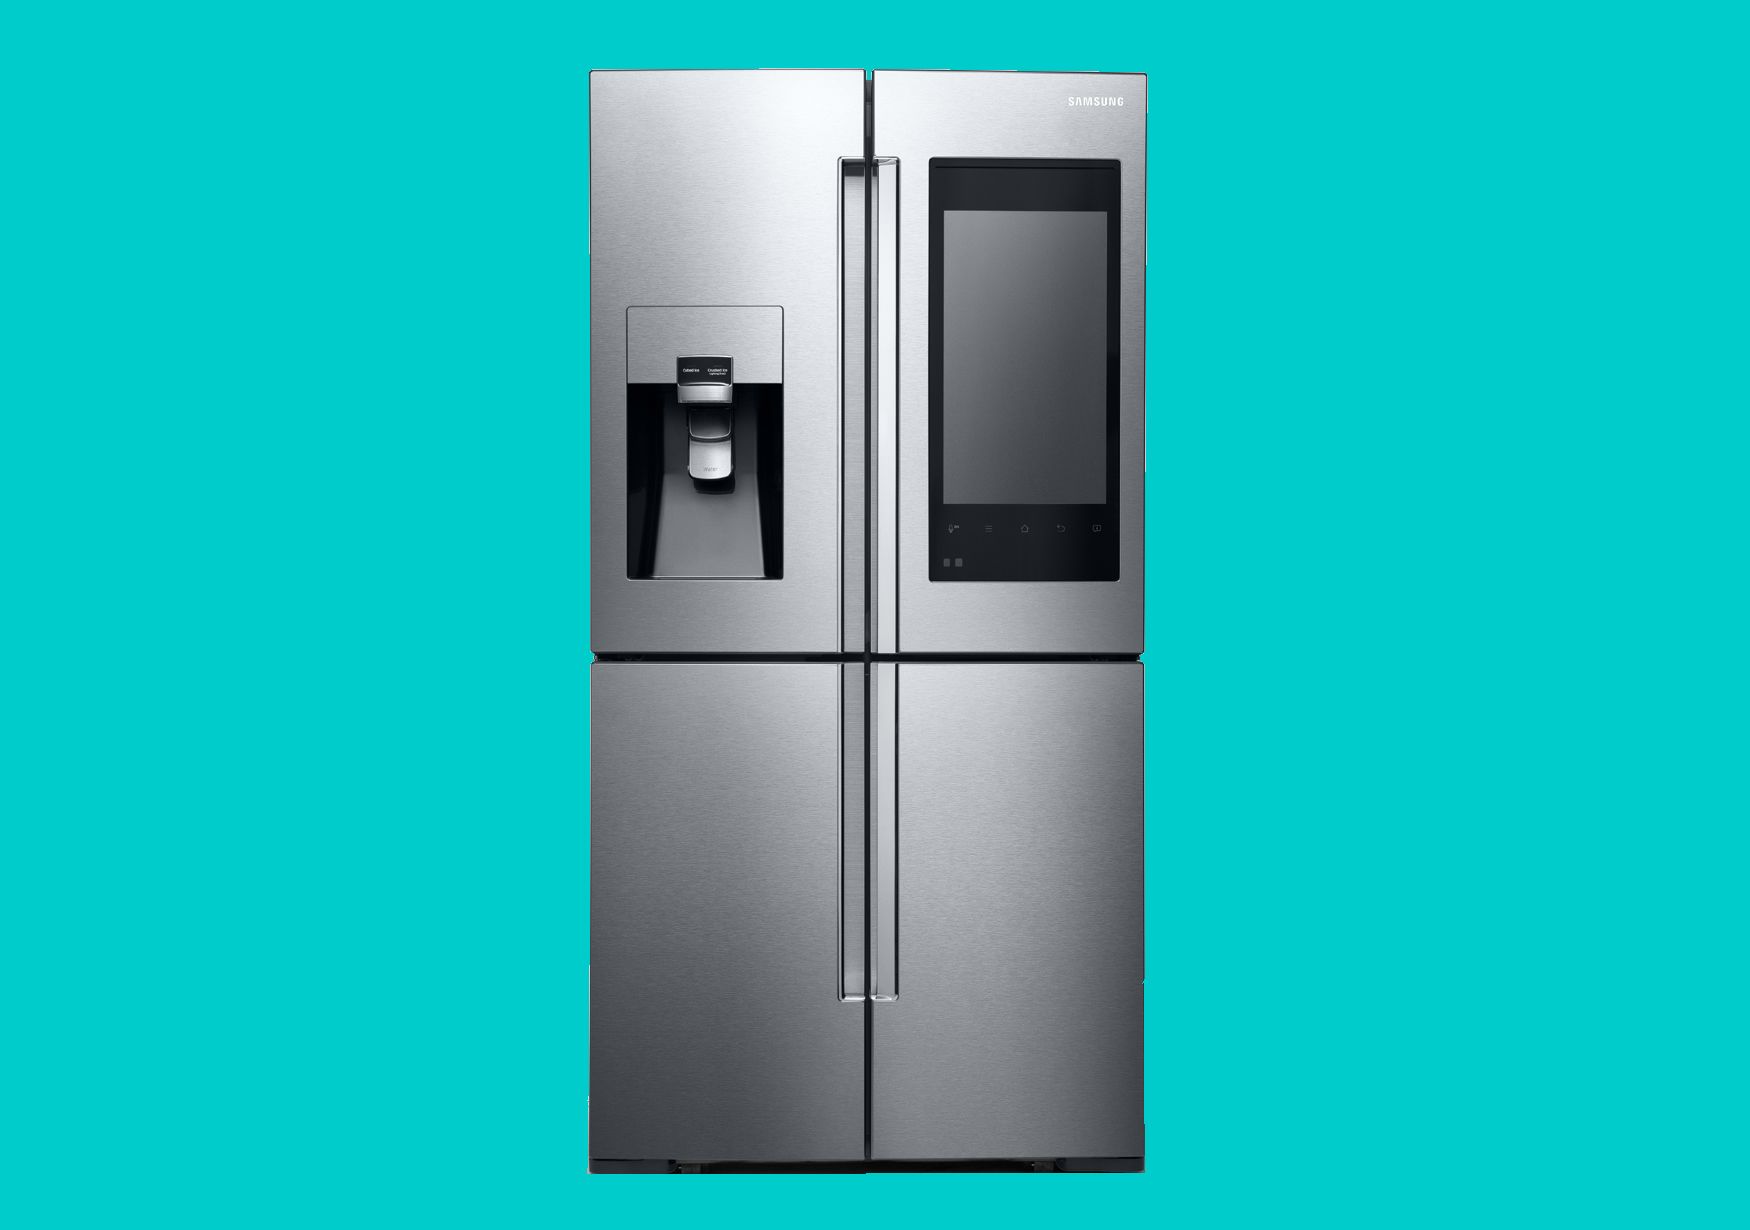 samsung family hub refrigerator comes with giant 21 5 inch screen and camera to spy on your food image 1